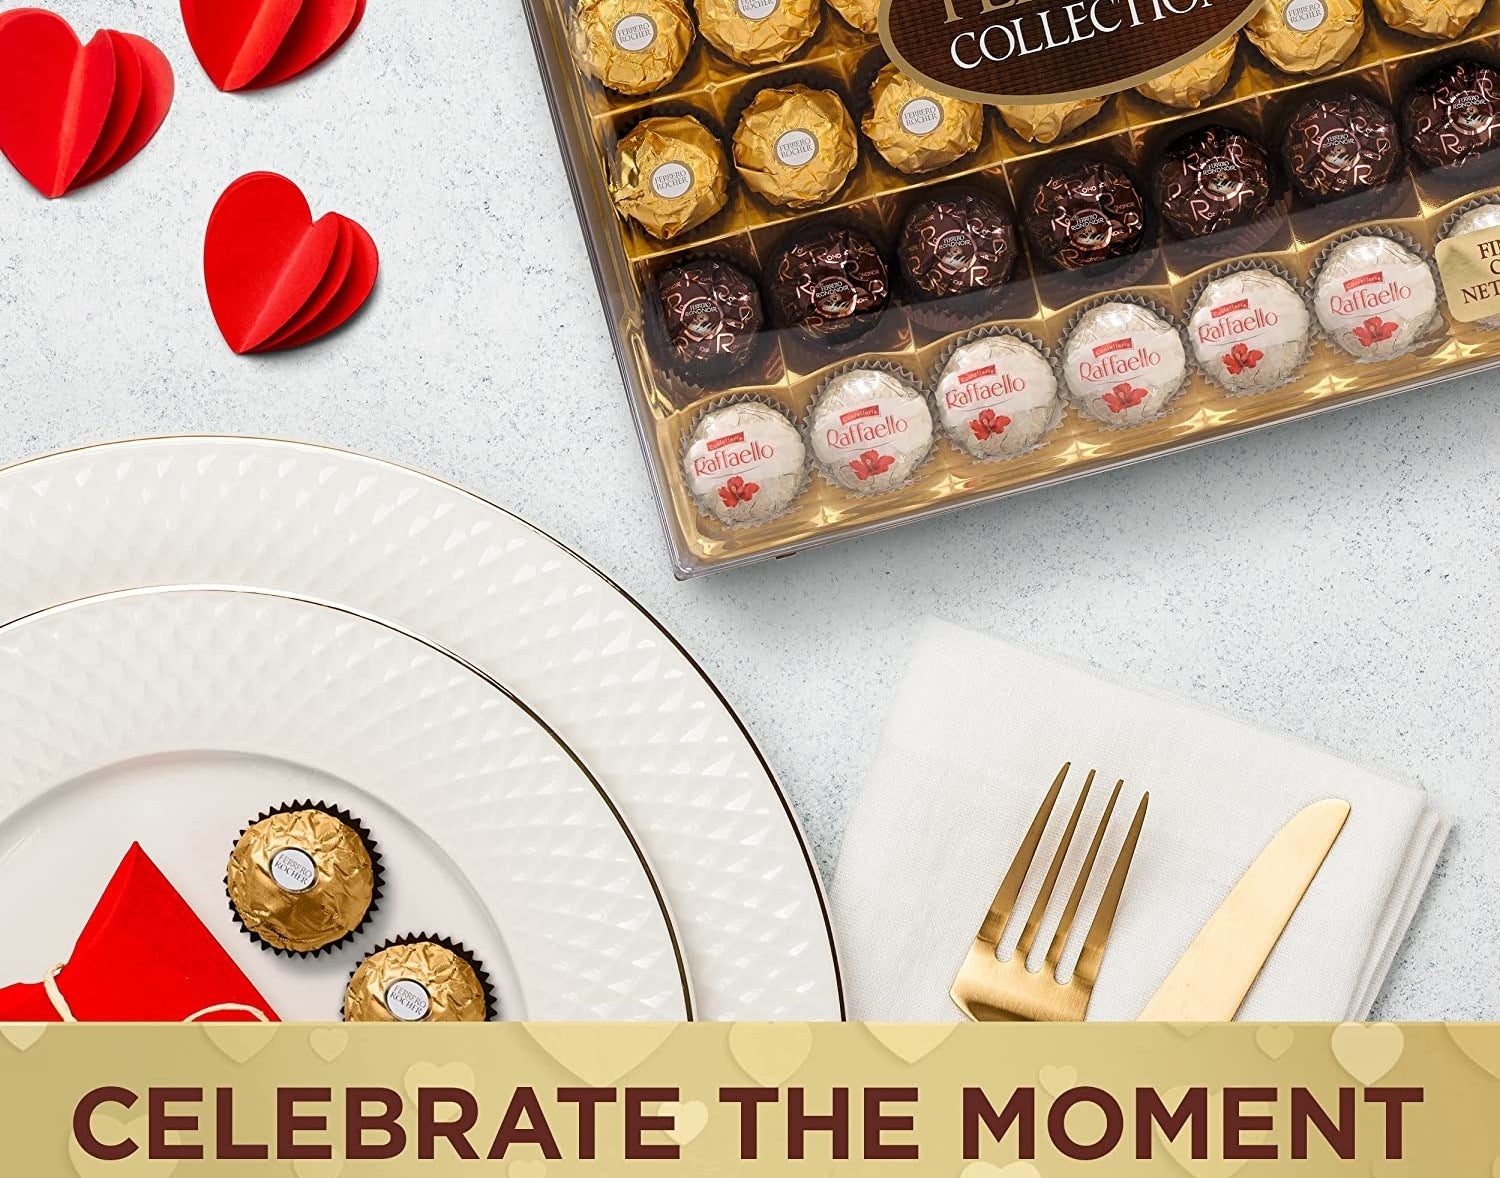 The 48-piece Ferrero Rocher Collection variety pack next to some plates